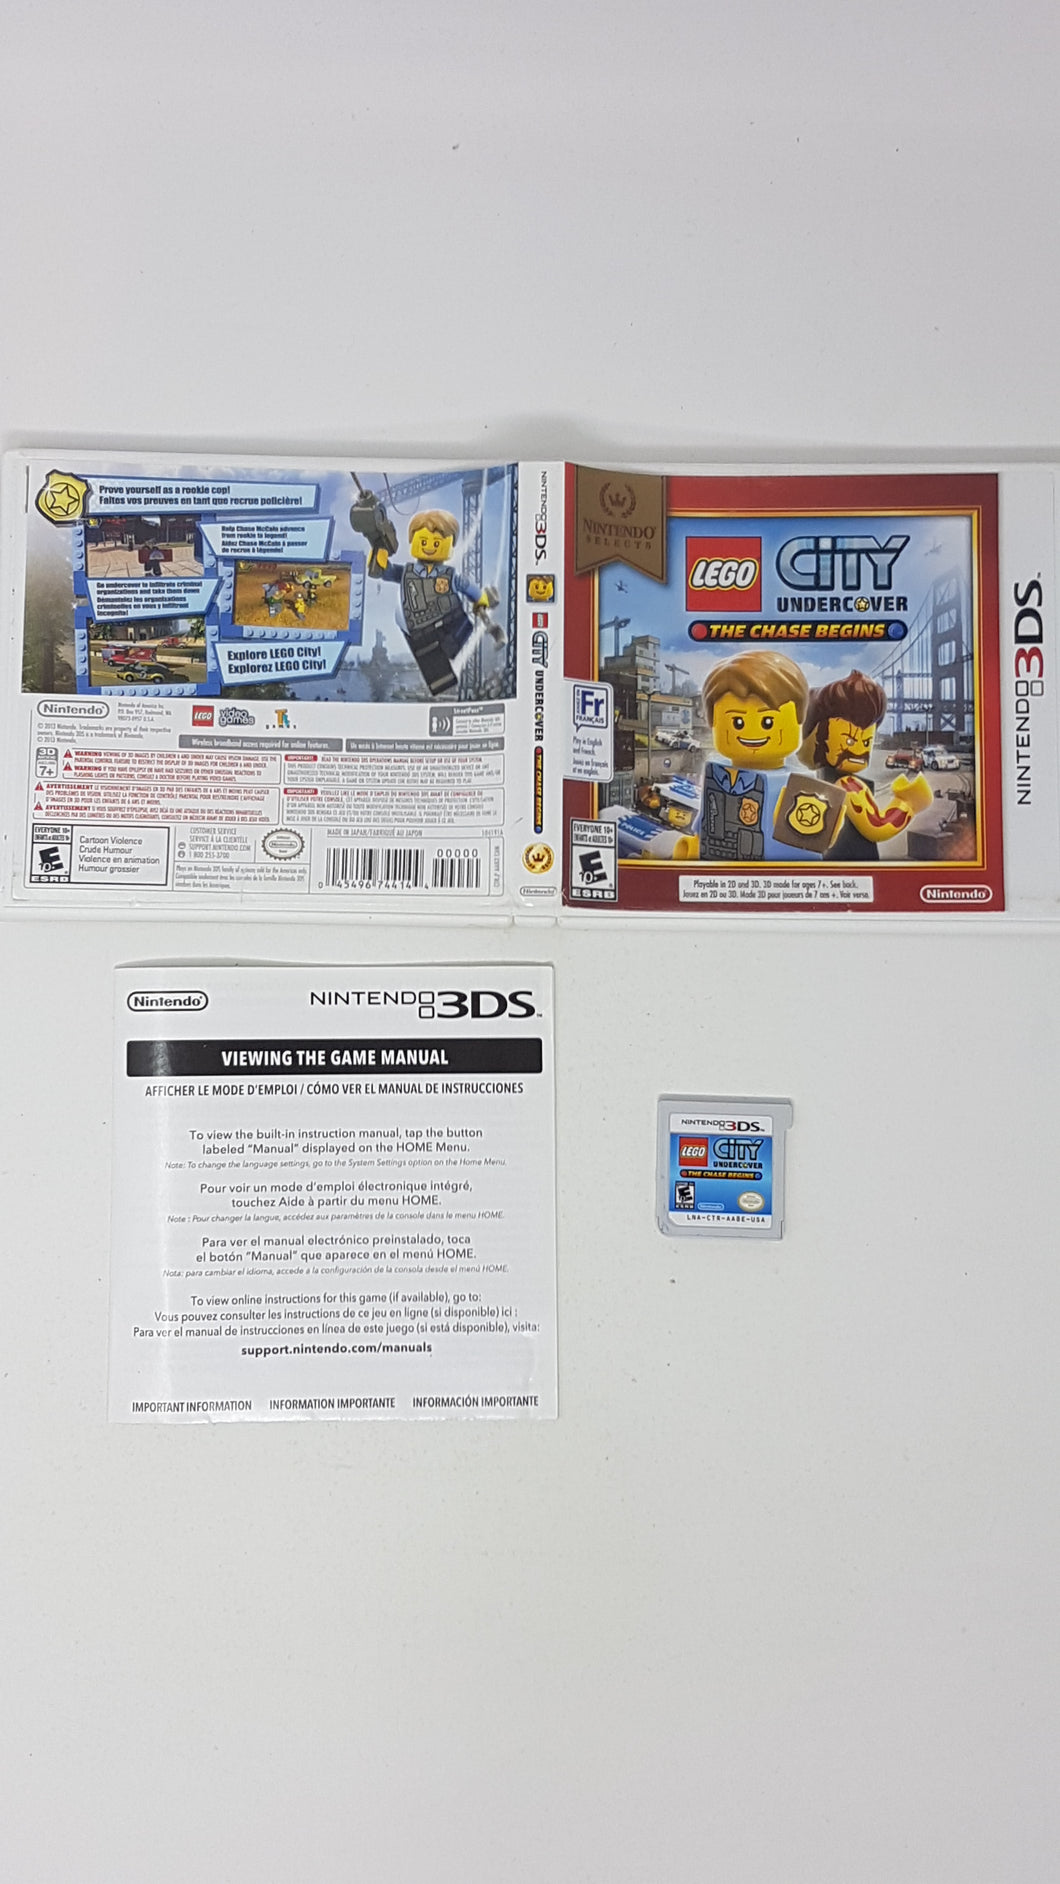 LEGO City Undercover - The Chase Begins - Nintendo 3DS